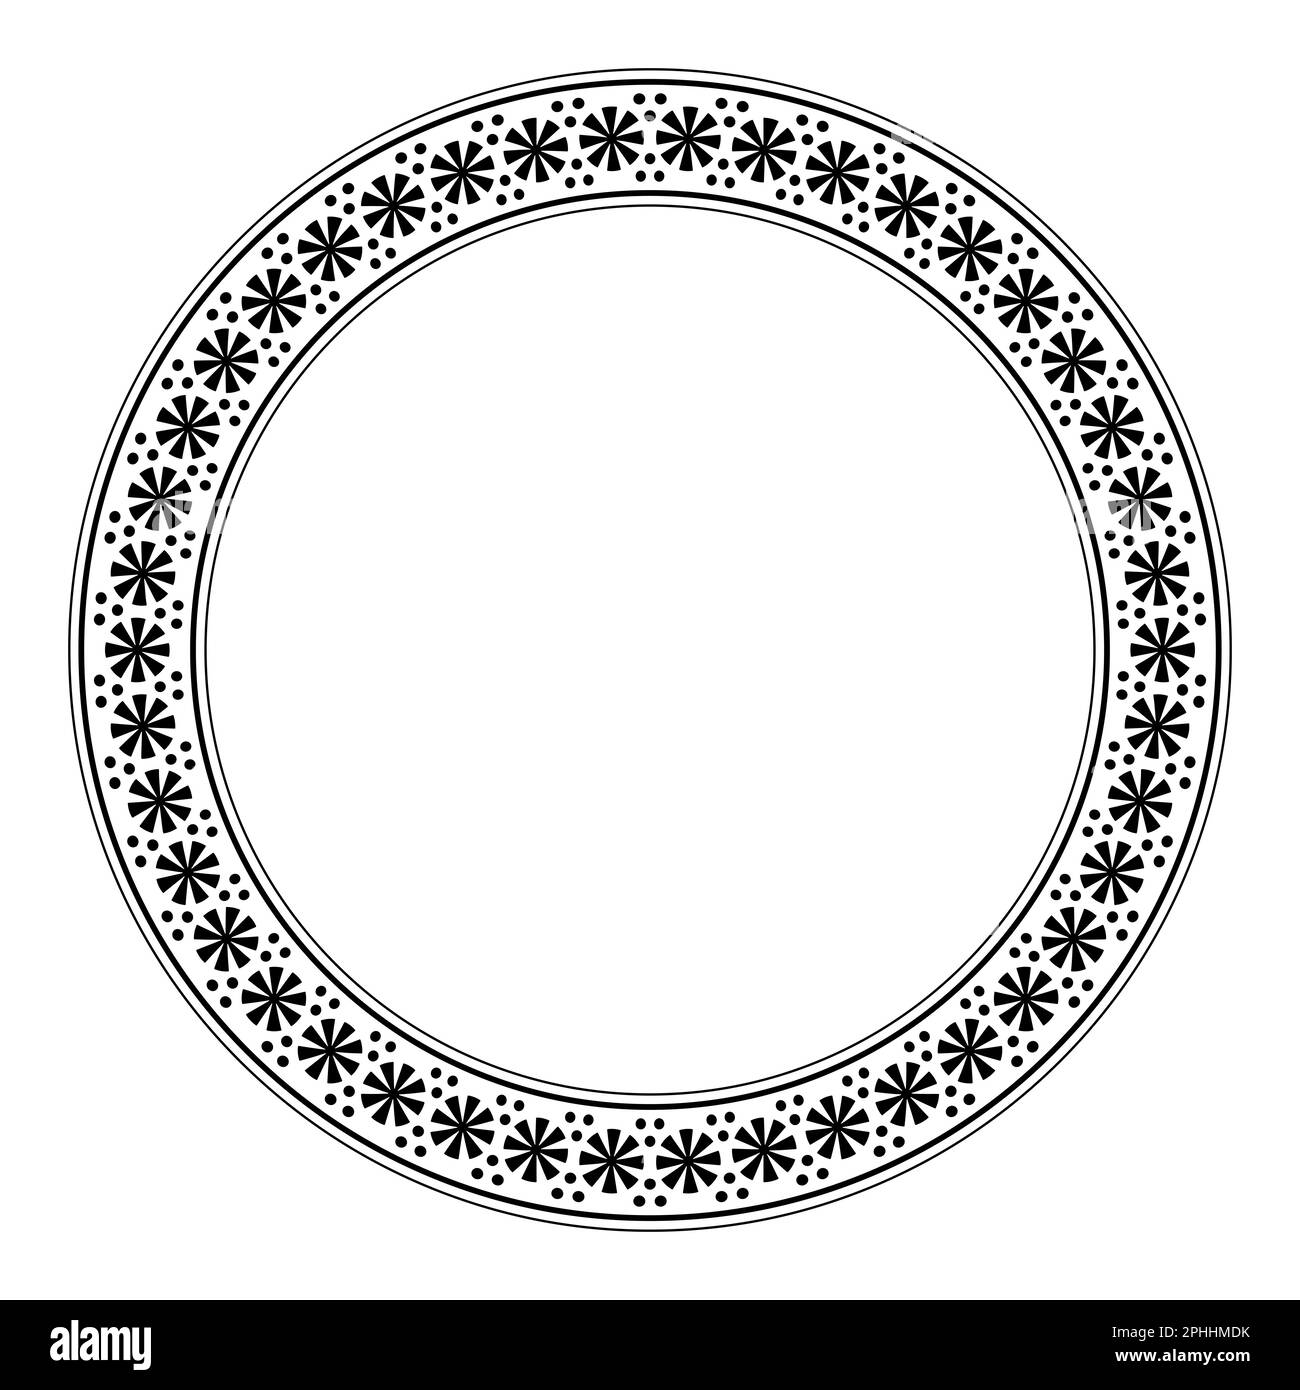 Circle frame with rosette pattern and dots. Decorative circular border with round, stylized flower motif, that can be found on ancient Greek pottery. Stock Photo